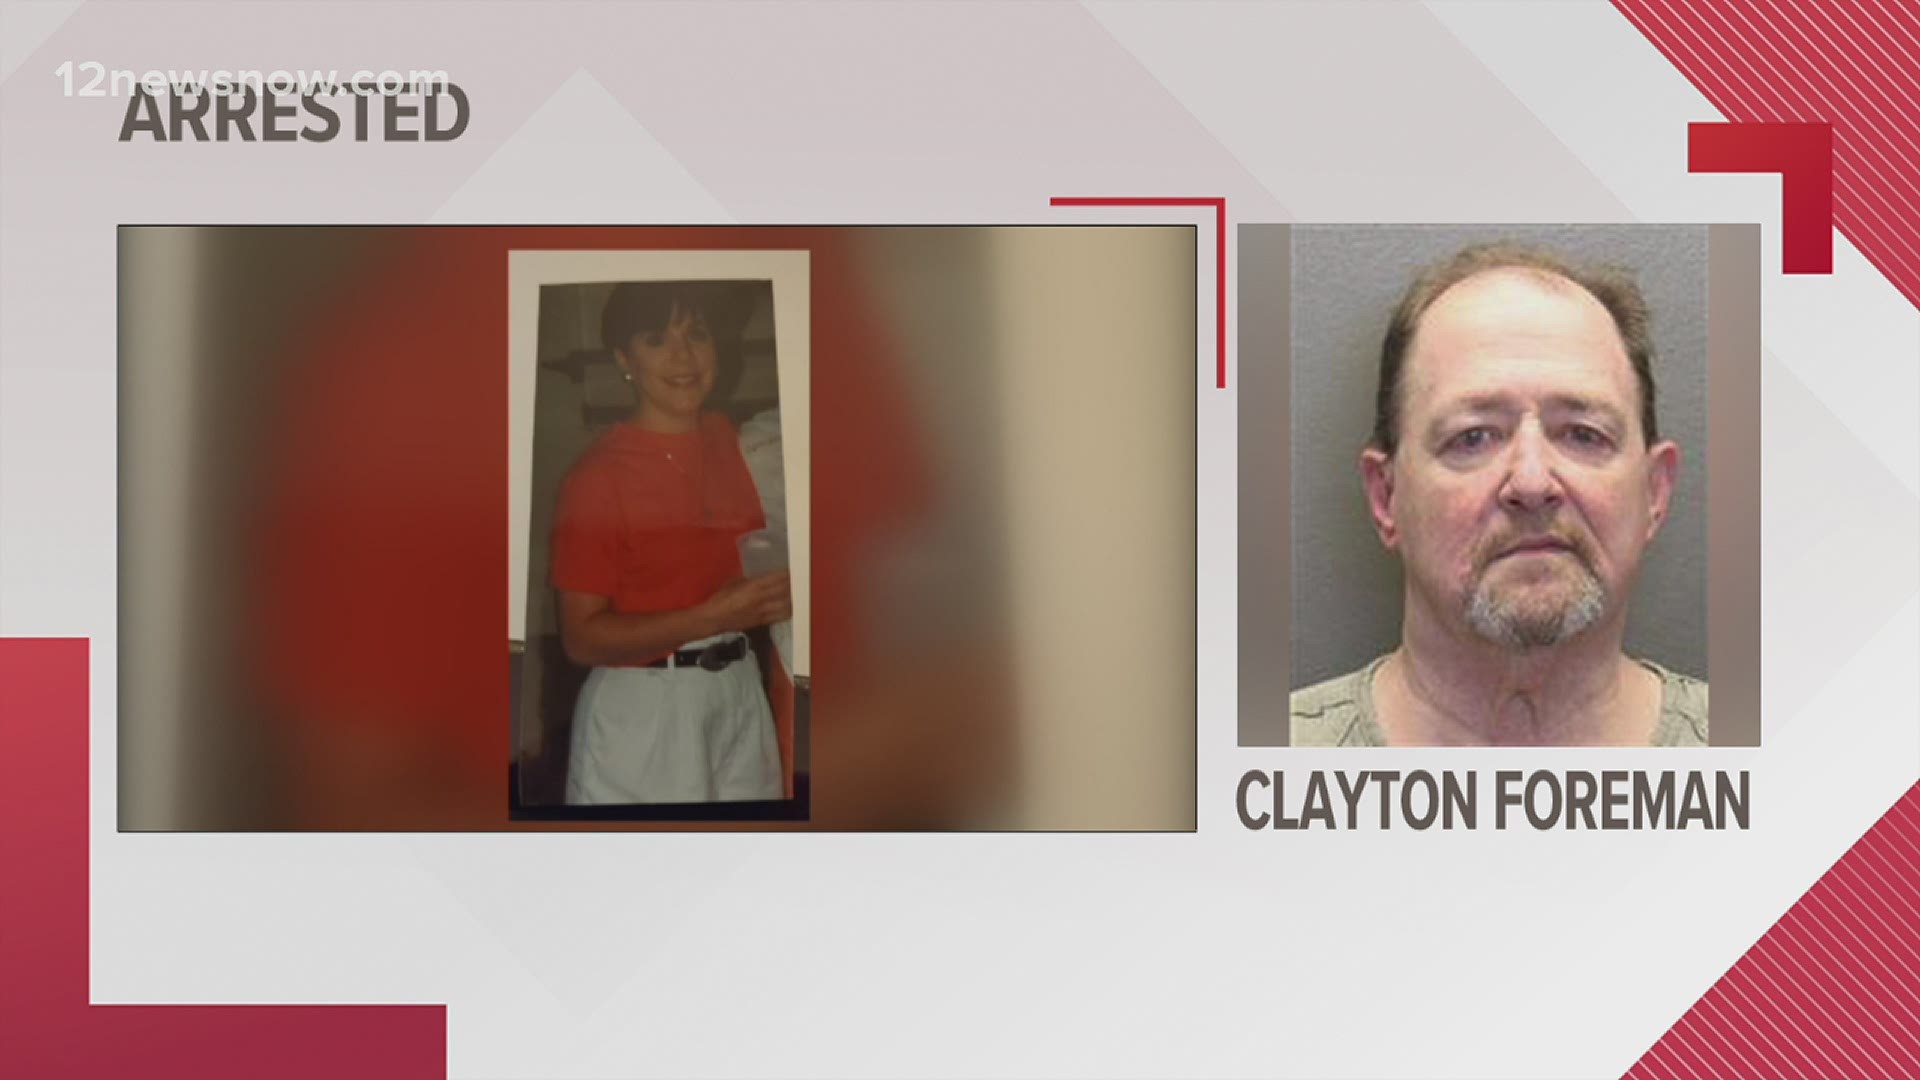 DNA evidence along with a genealogy database have led police to the man they believe murdered a Beaumont teacher in 1995.